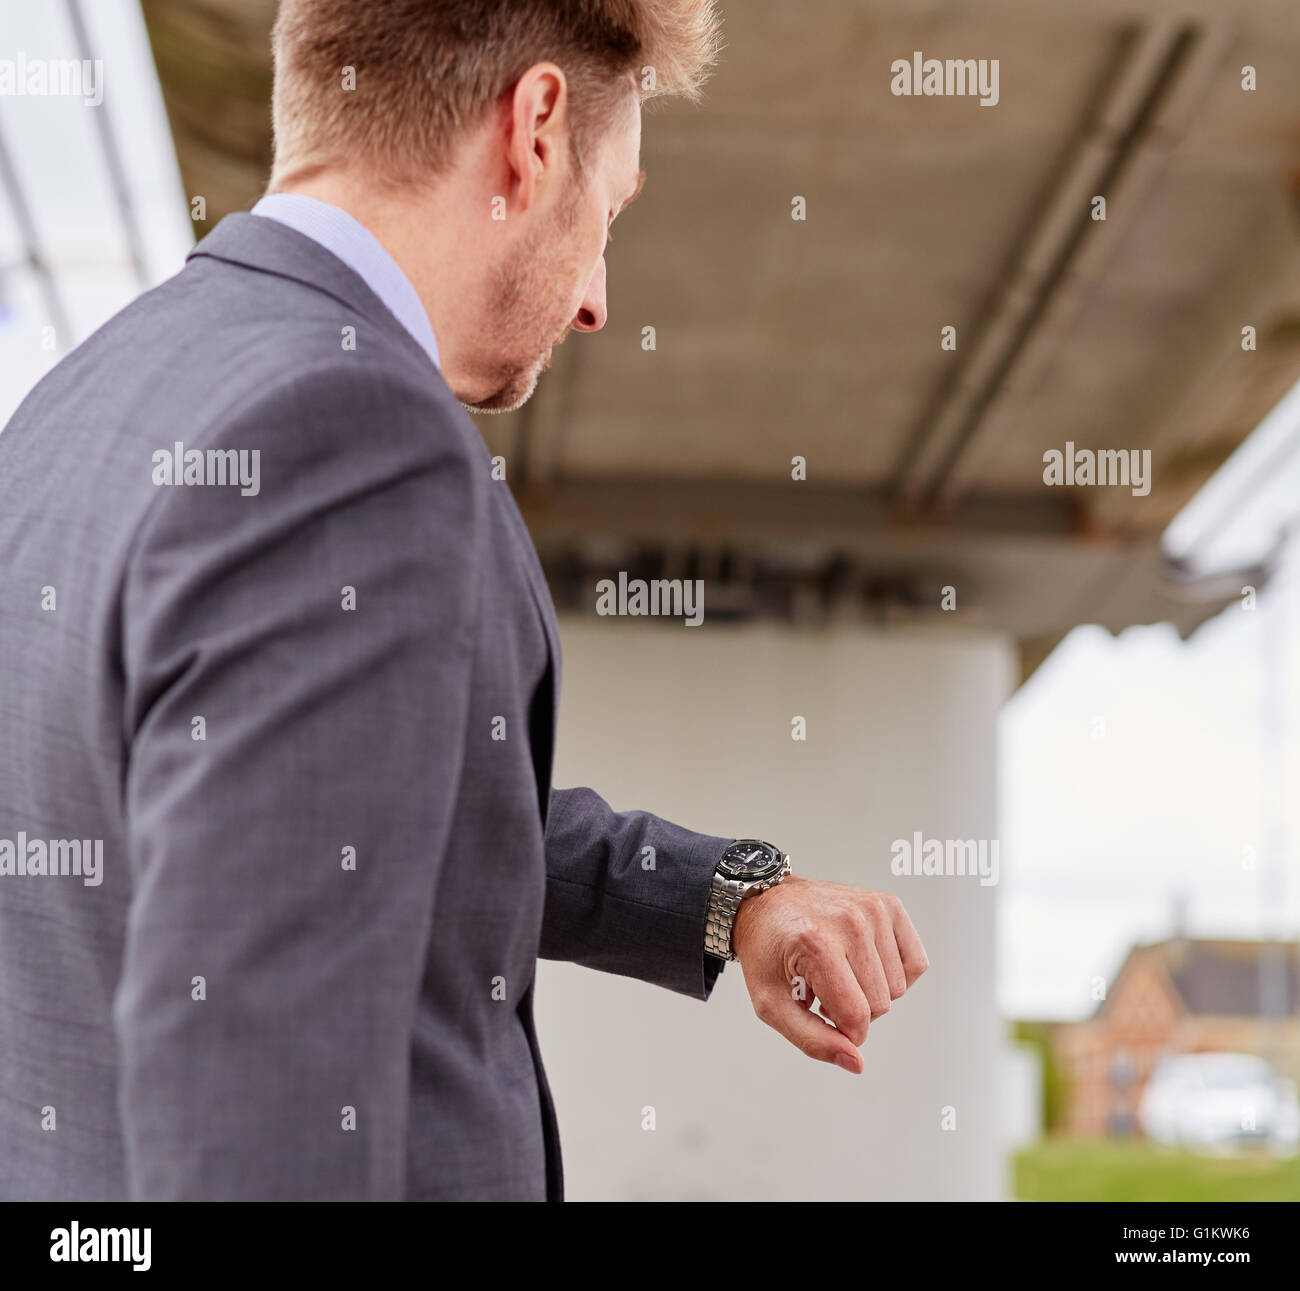 Man looking at his watch rushing to work Stock Photo